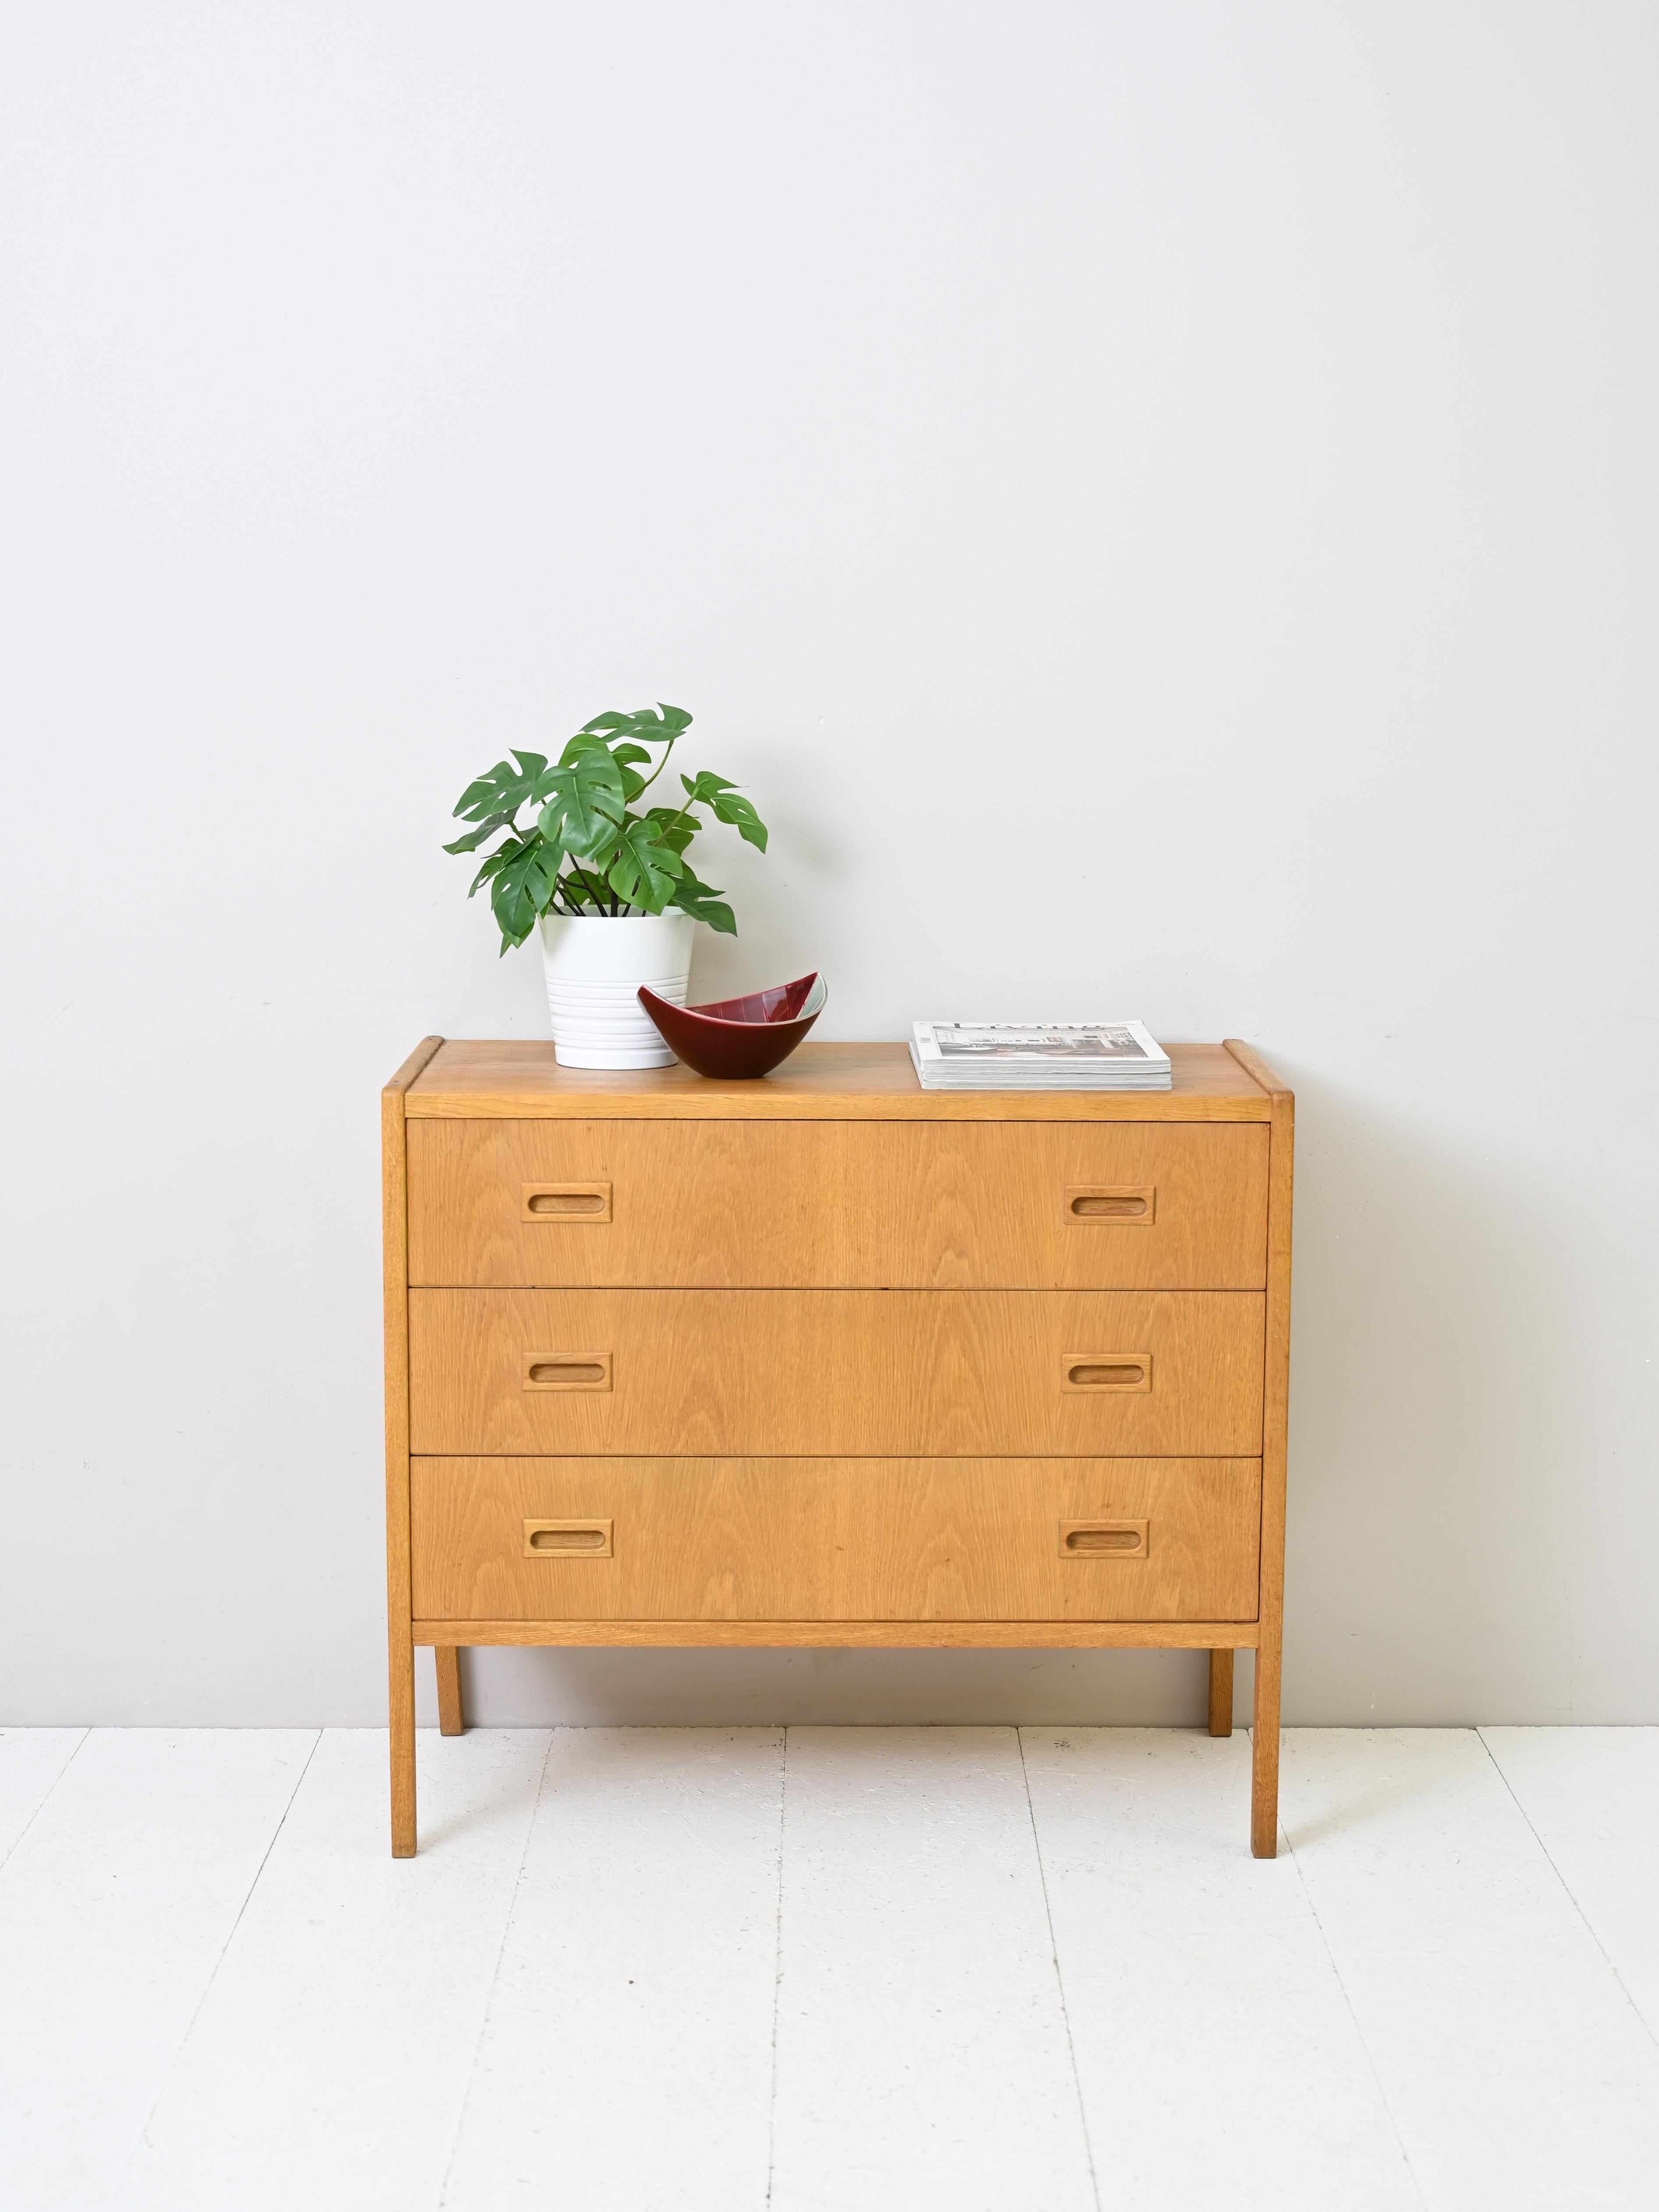 Vintage cabinet with three drawers of Scandinavian manufacture produced in the 1960s.
Simple, linear forms for this chest of drawers in warm teak wood tones.
Clean lines and drawer handles carved from wood are the hallmarks that
hark back to